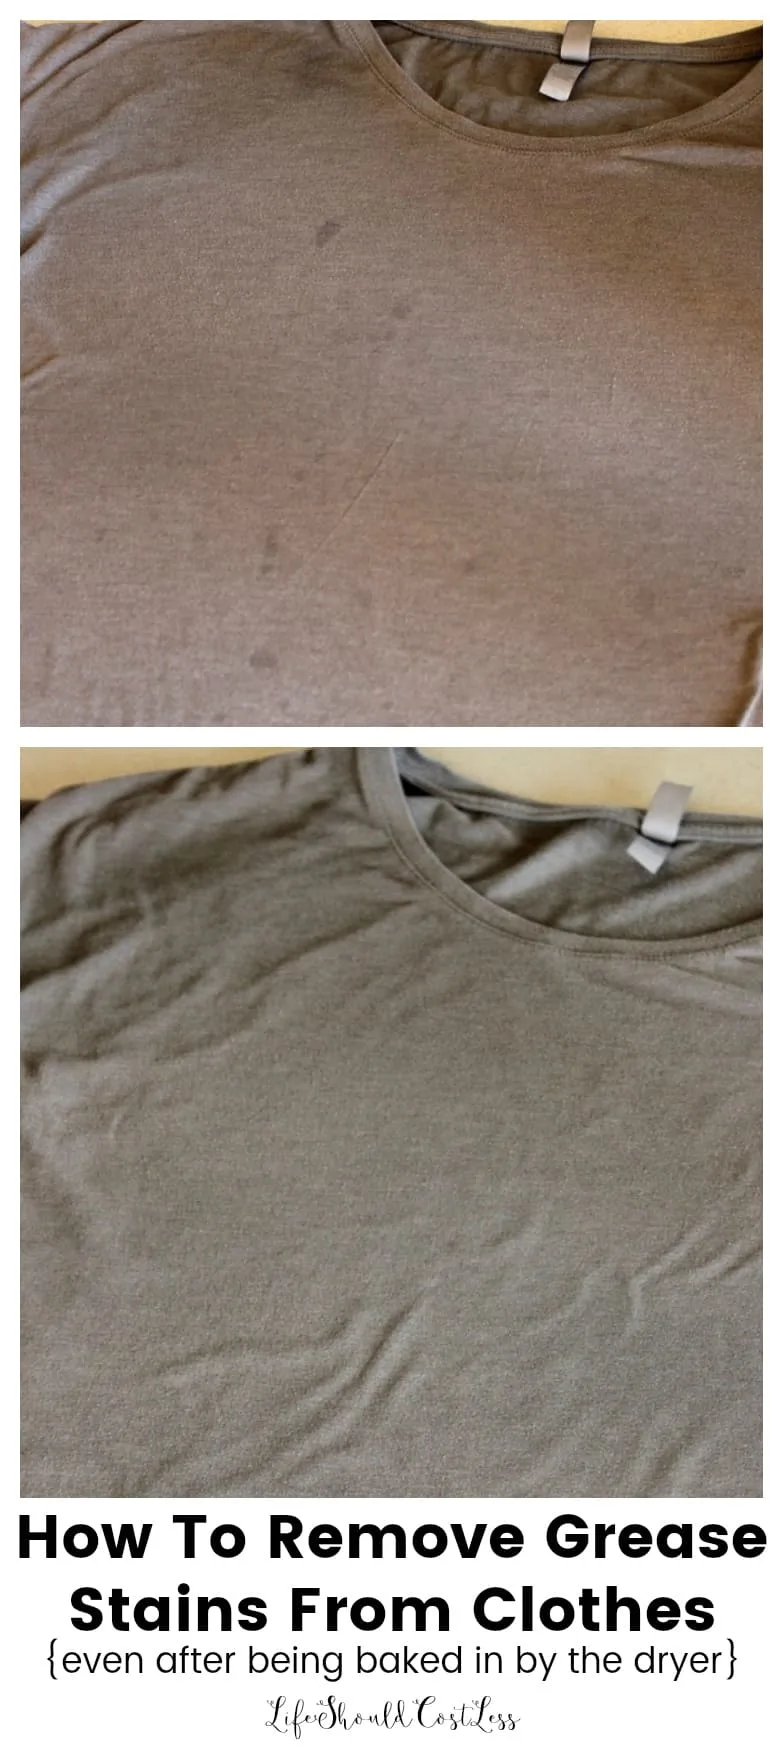 How To Get Grease Stains Out Of Clothing, even after being run through the dryer. 